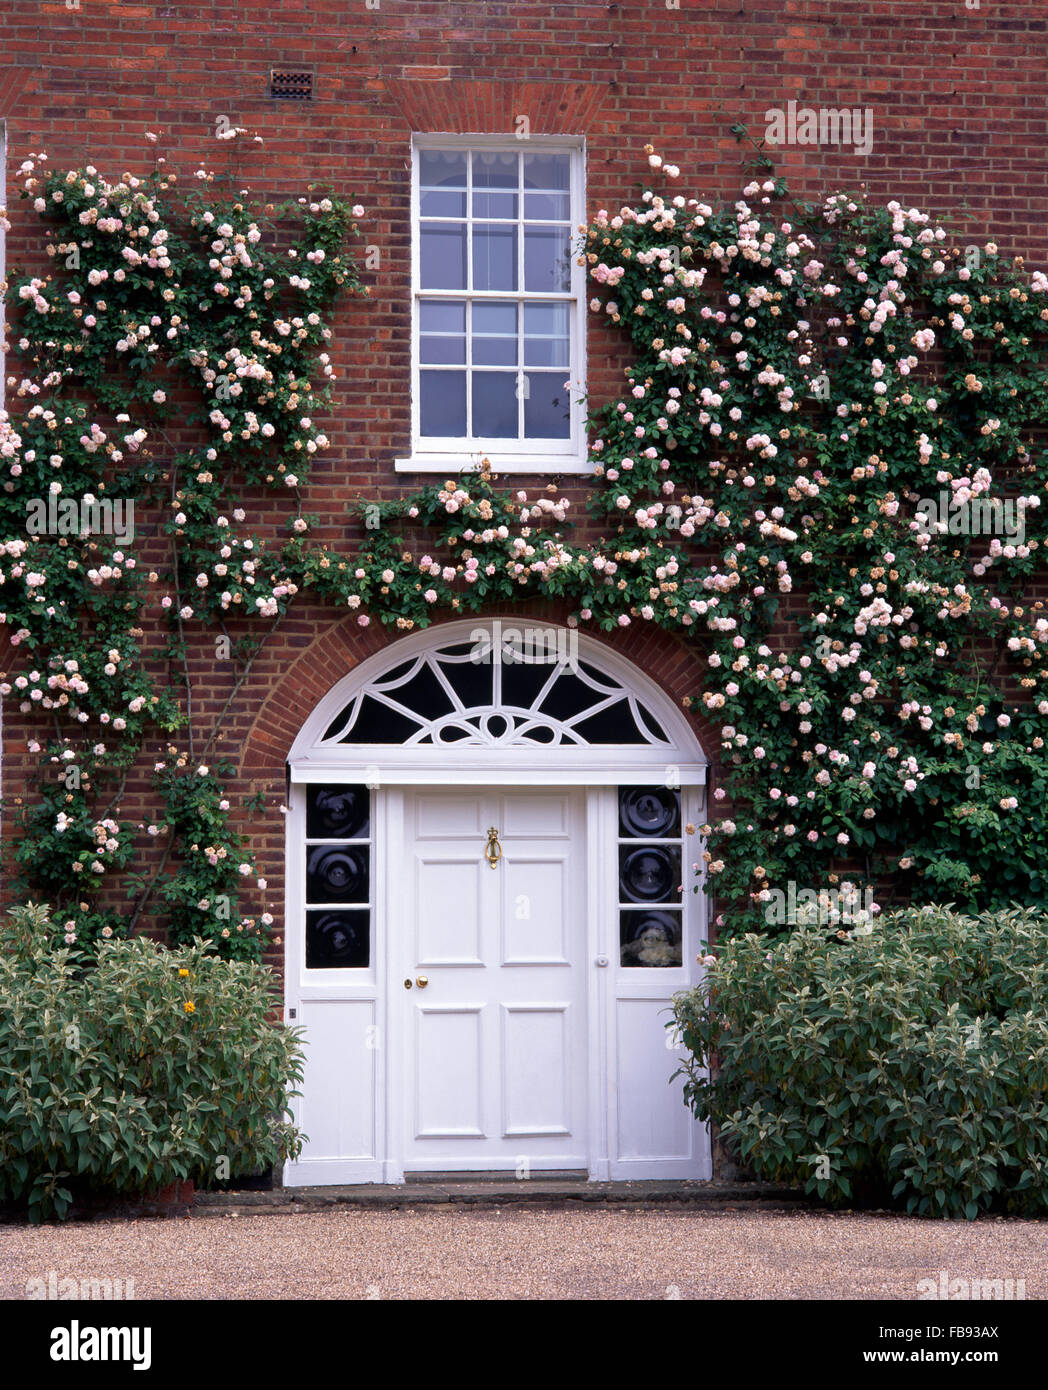 Exterior of Georgian country house with pink climbing roses on the walls above a white front door Stock Photo